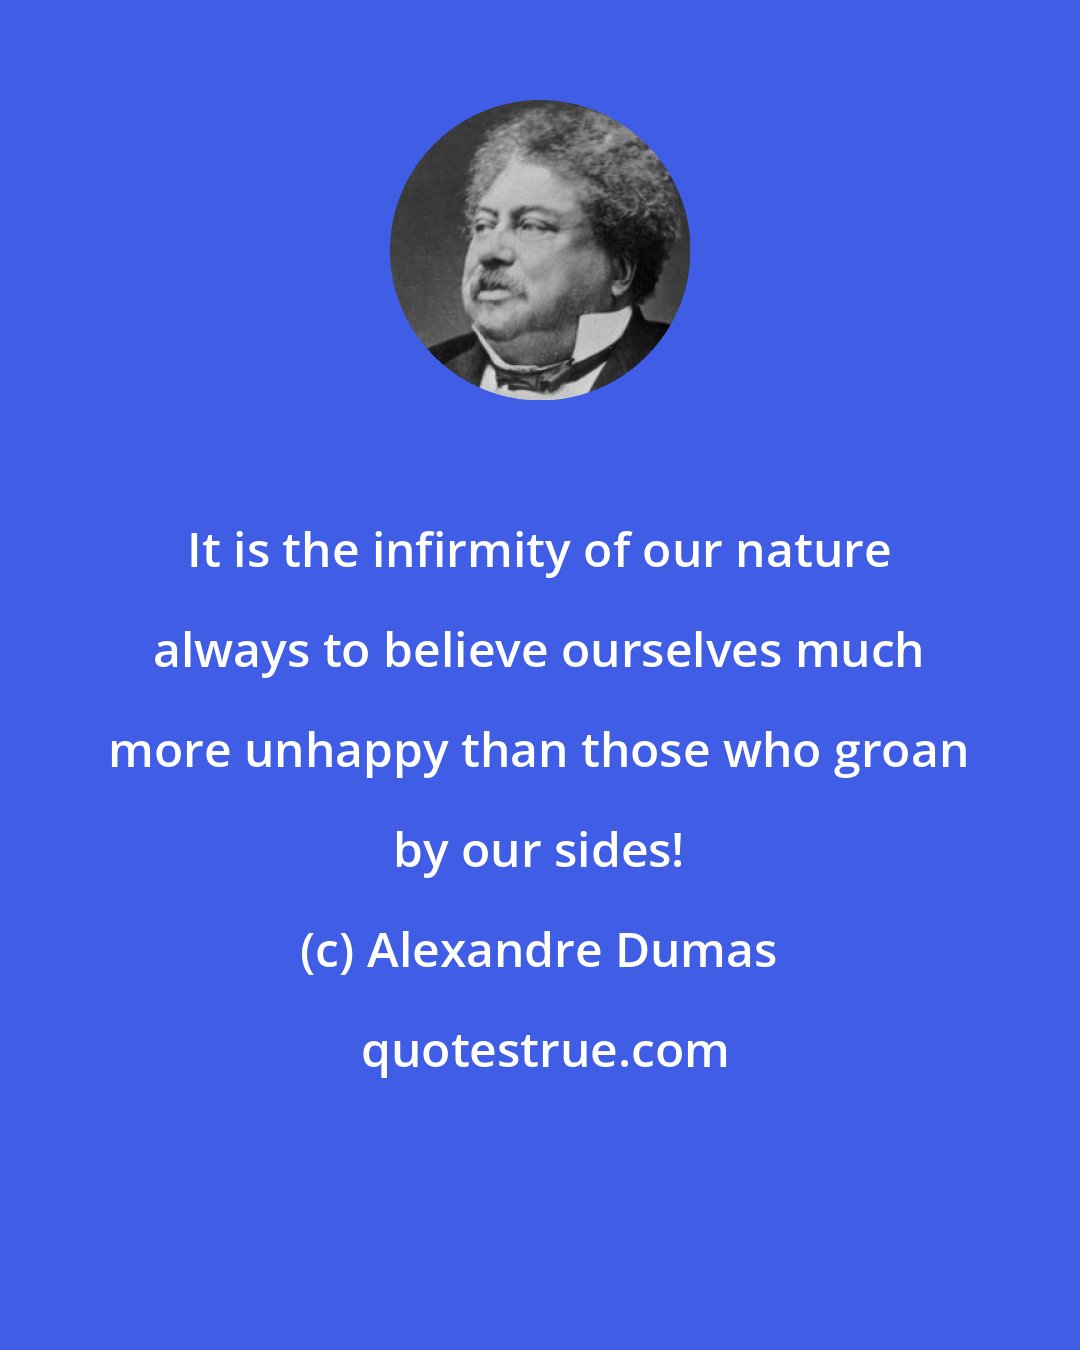 Alexandre Dumas: It is the infirmity of our nature always to believe ourselves much more unhappy than those who groan by our sides!